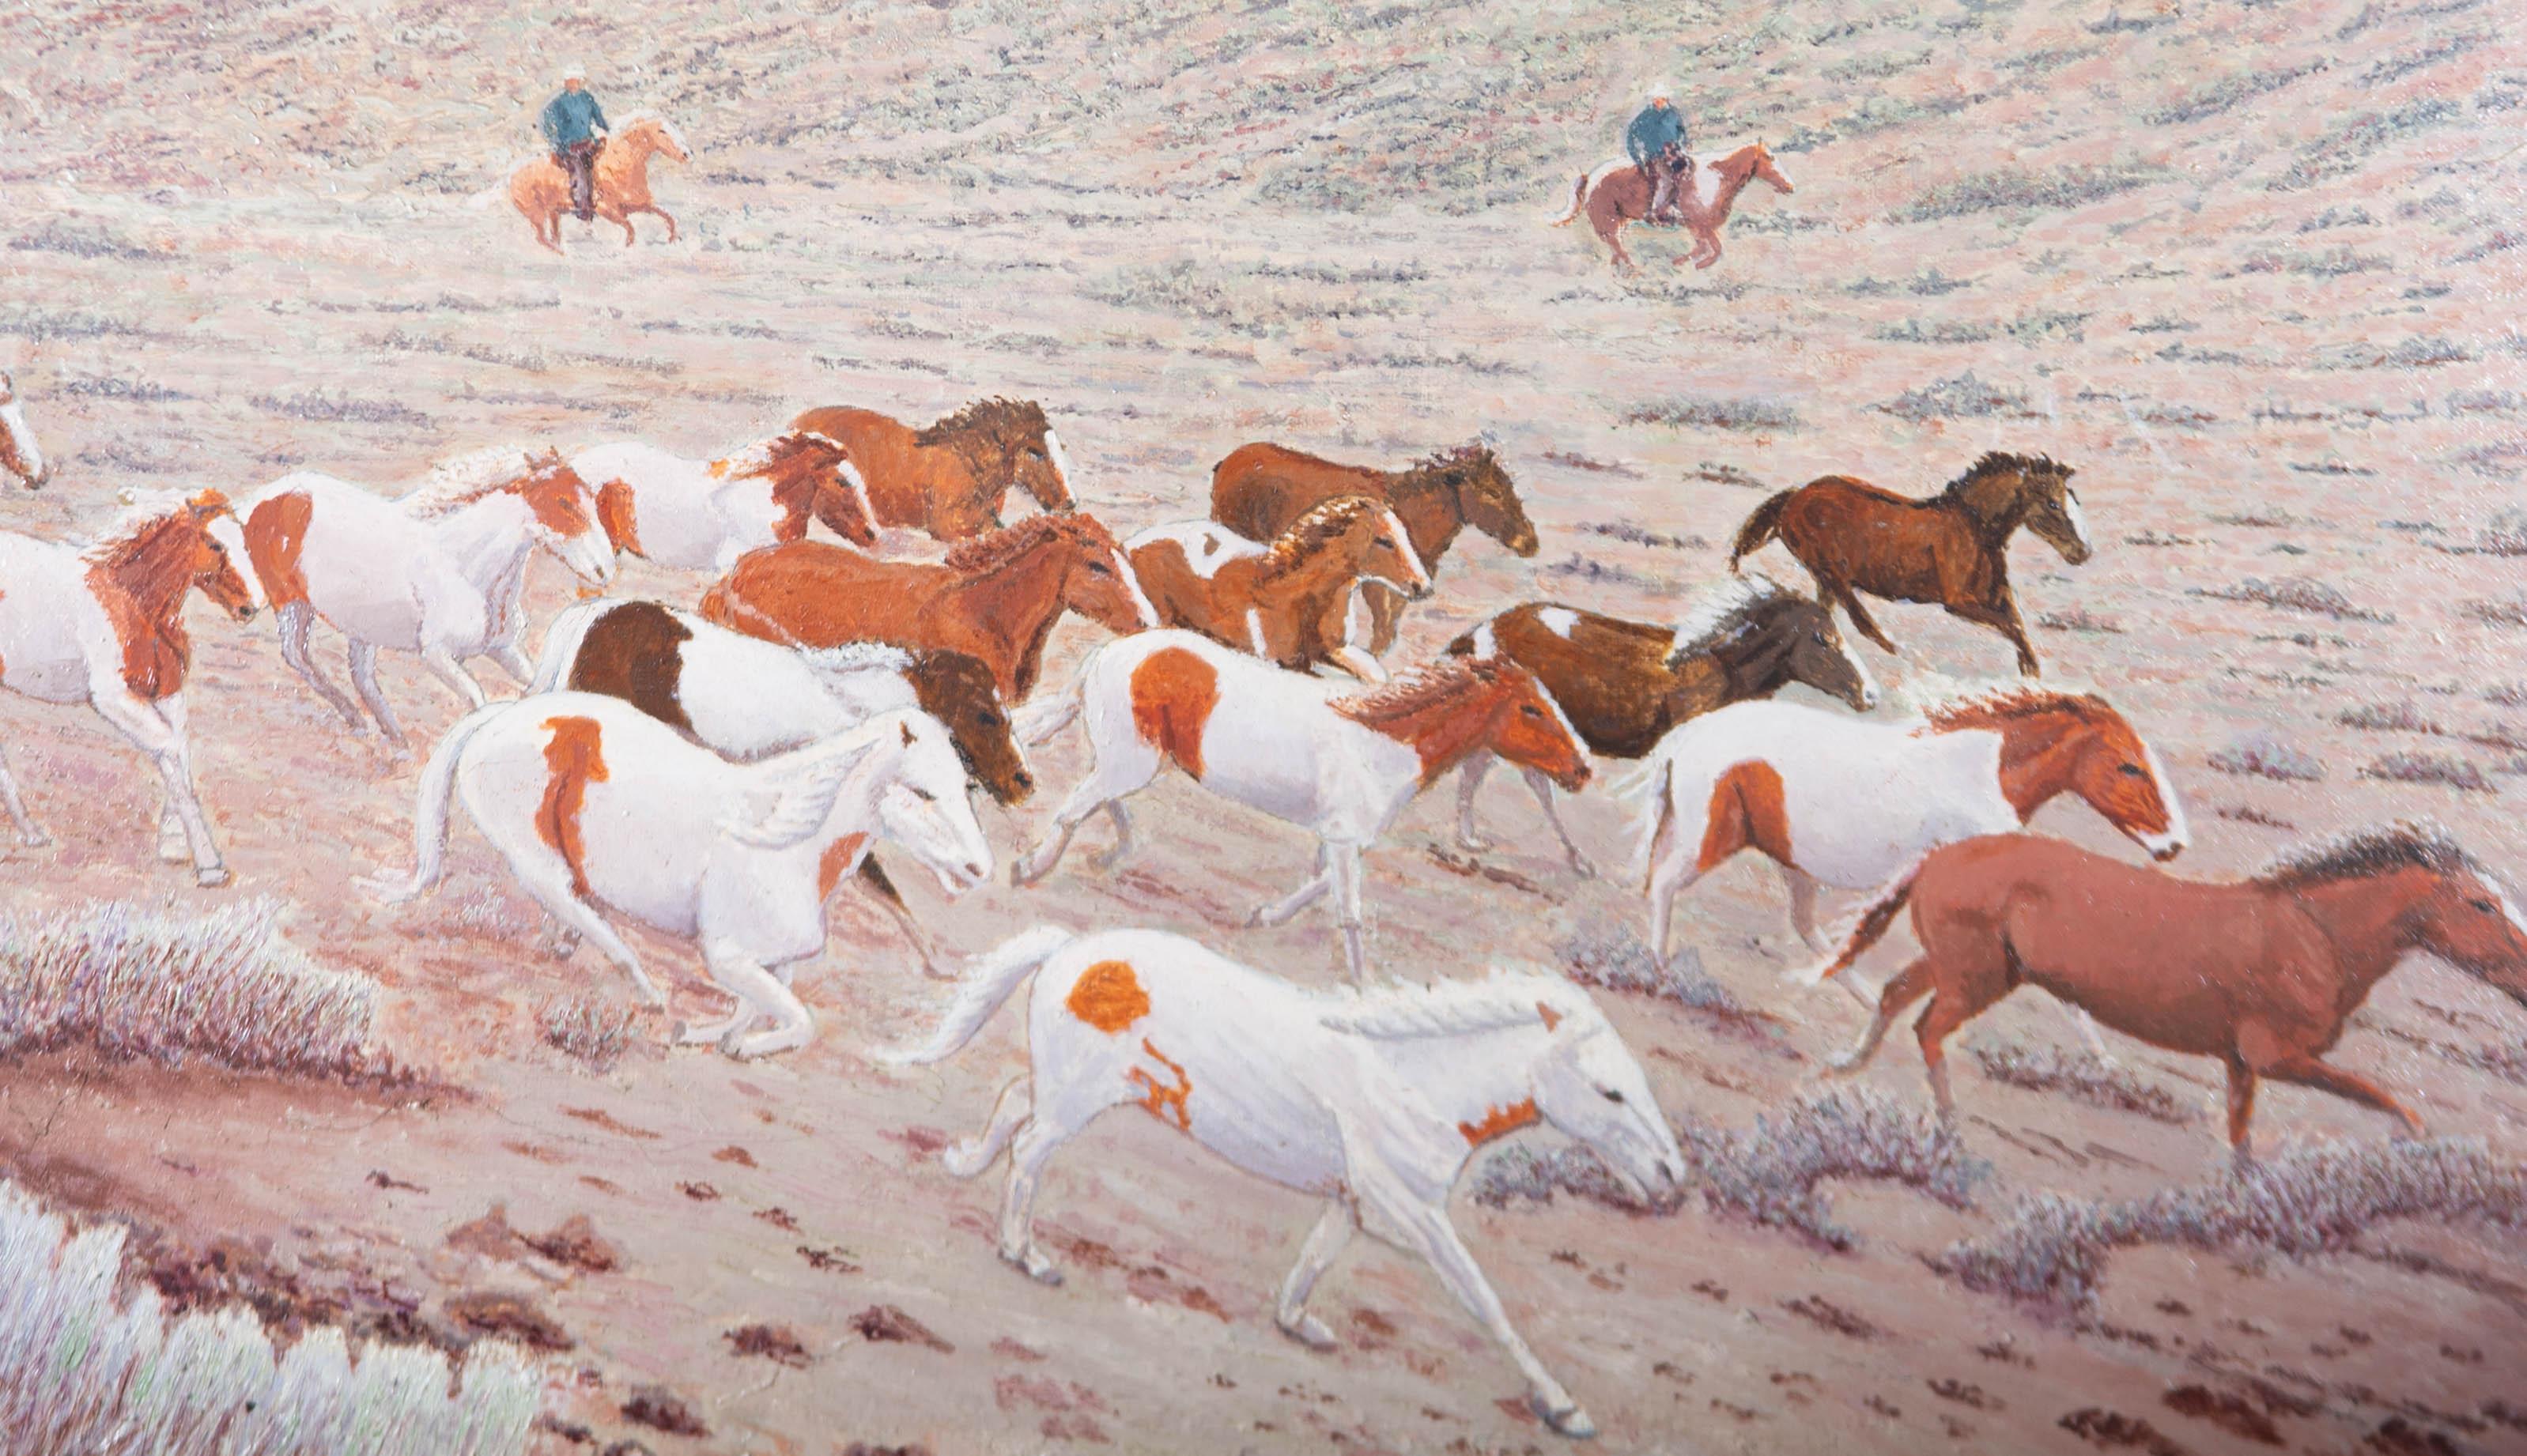 W.M. - 20th Century Oil, Herd of Wild Horses - Painting by Unknown